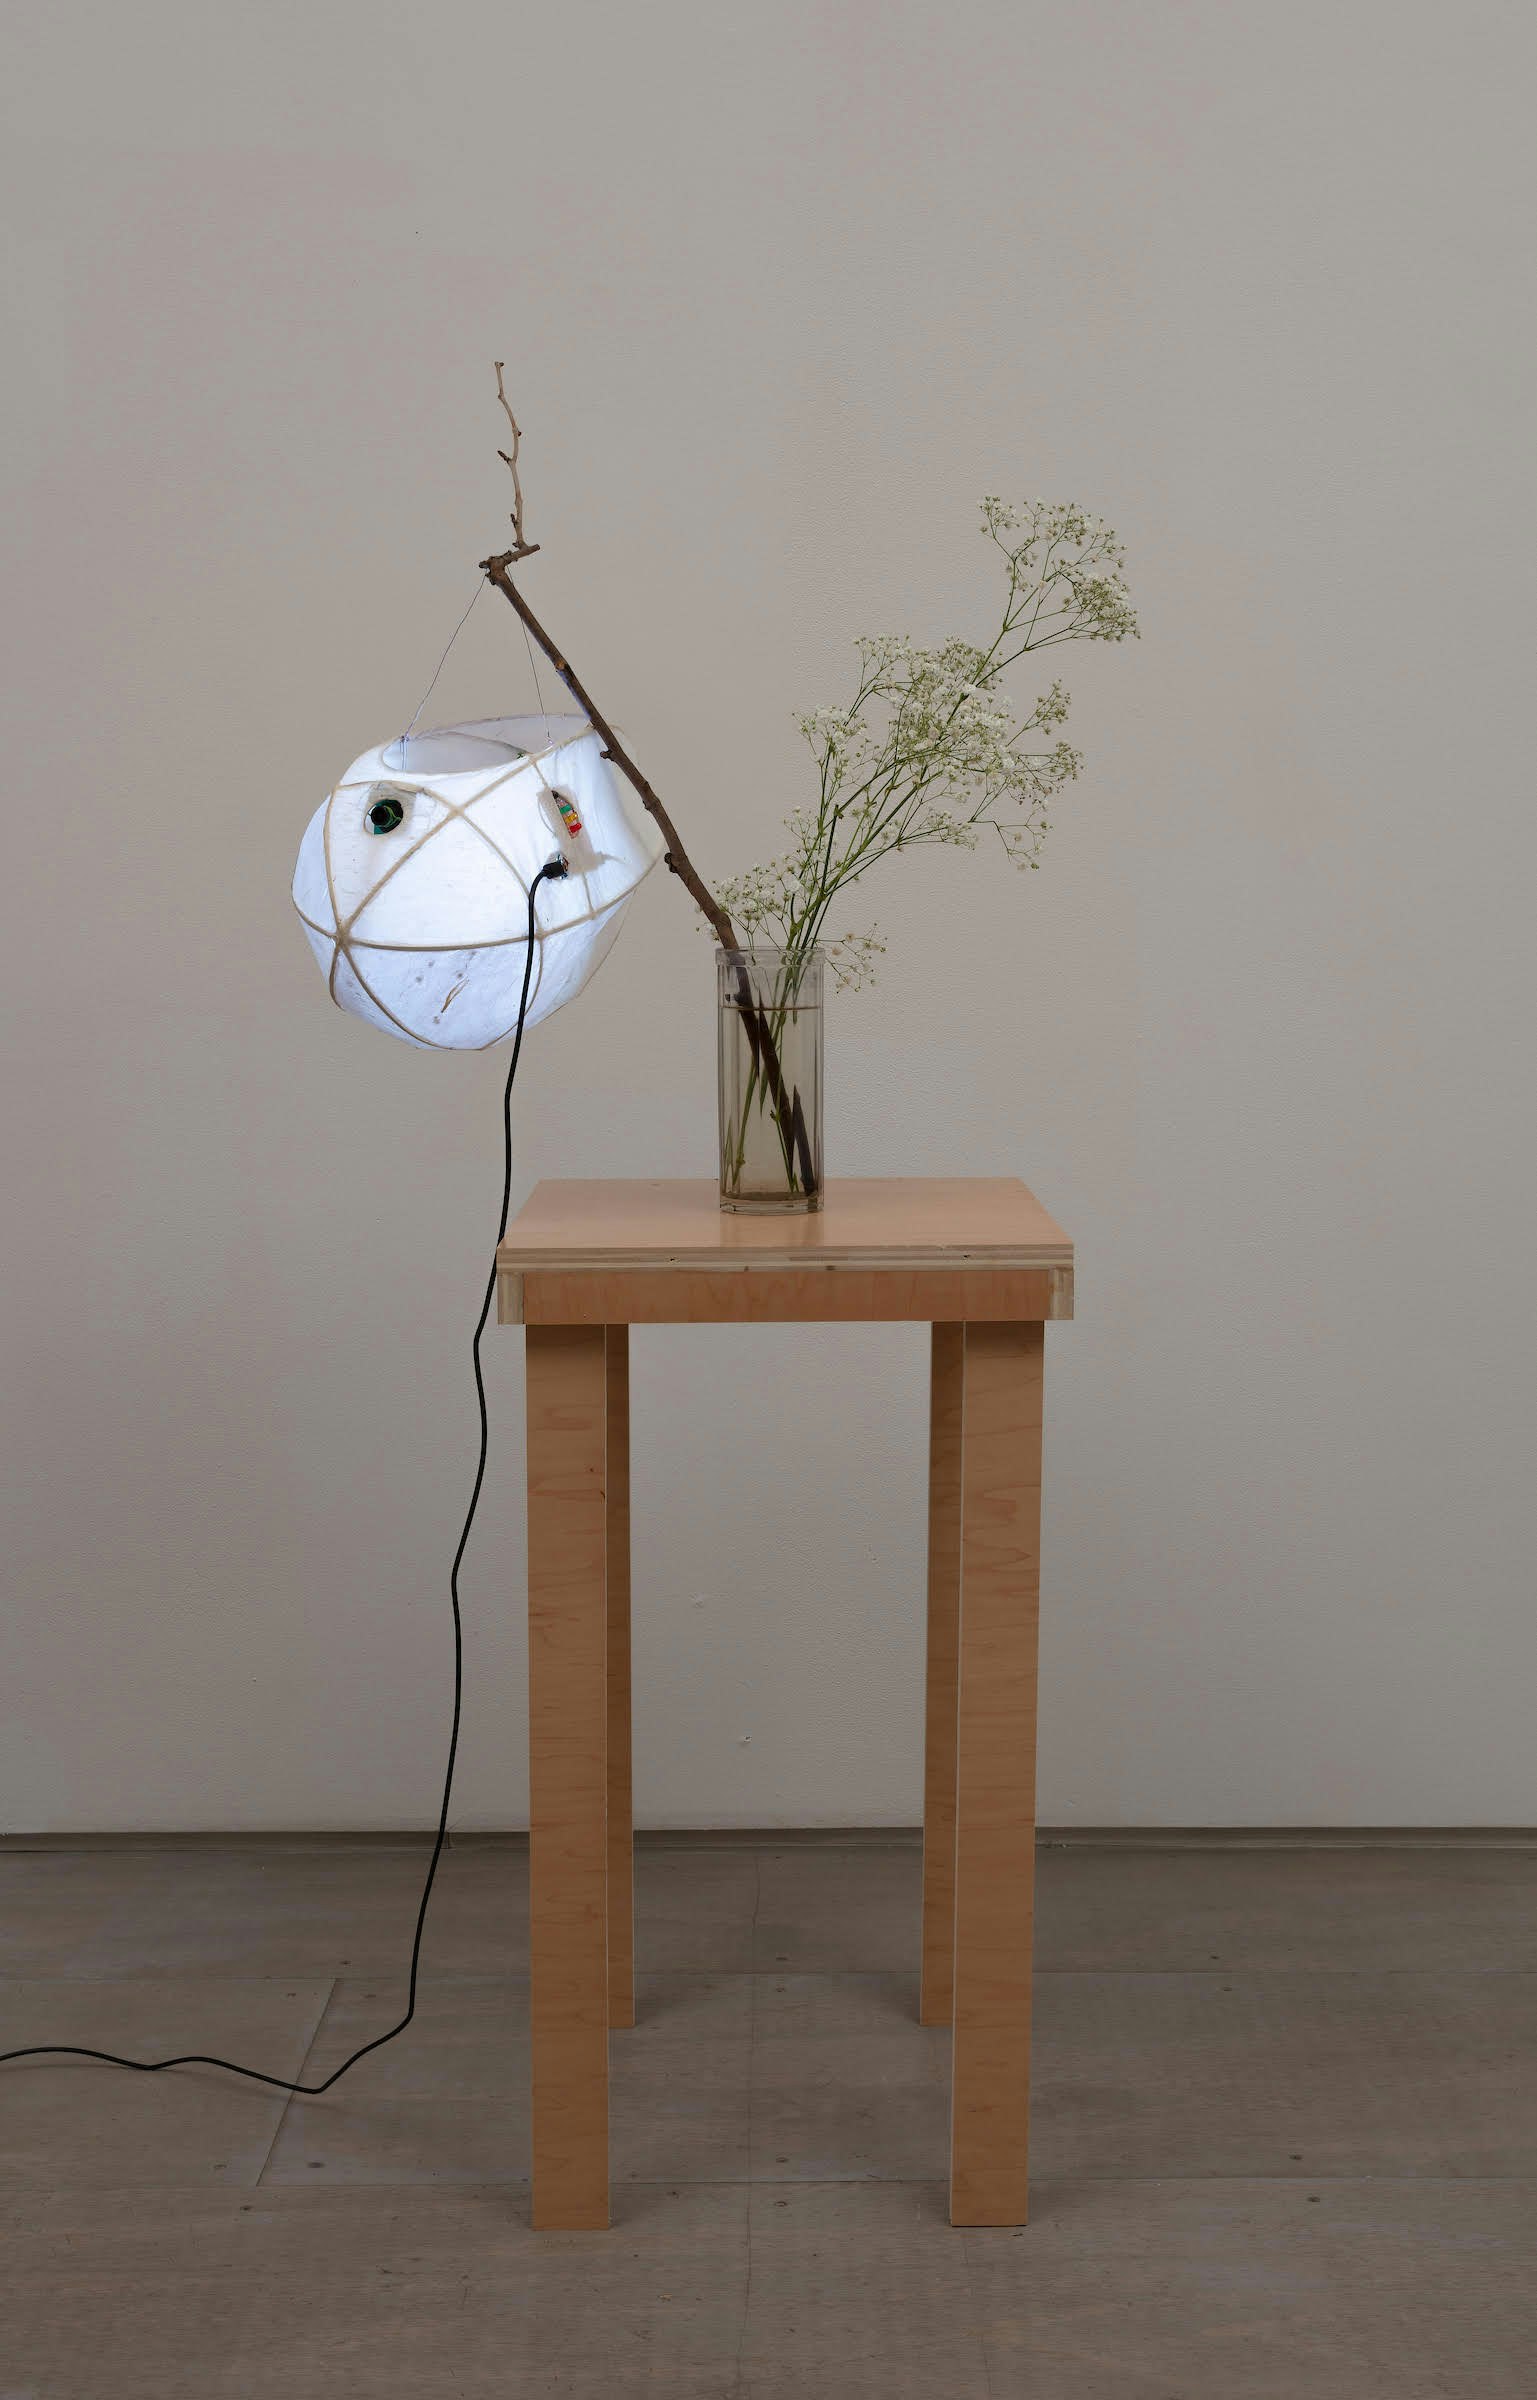 Cici Wu, <em>Foreign Object #2 Umbra and Penumbra (+852 carambola)</em>, 2021. Bamboo wire, paper, glue, metal wire, neopixel led, opencv camera, raspberry pi 4B, power adapter board, switch, led, micro-usb cable, lithium battery, memory card, artist’s lantern holder and plinth, 51 1/2 x 20 1/2 x 14 3/4 inches. Courtesy 47 Canal. Photo: Joerg Lohse.